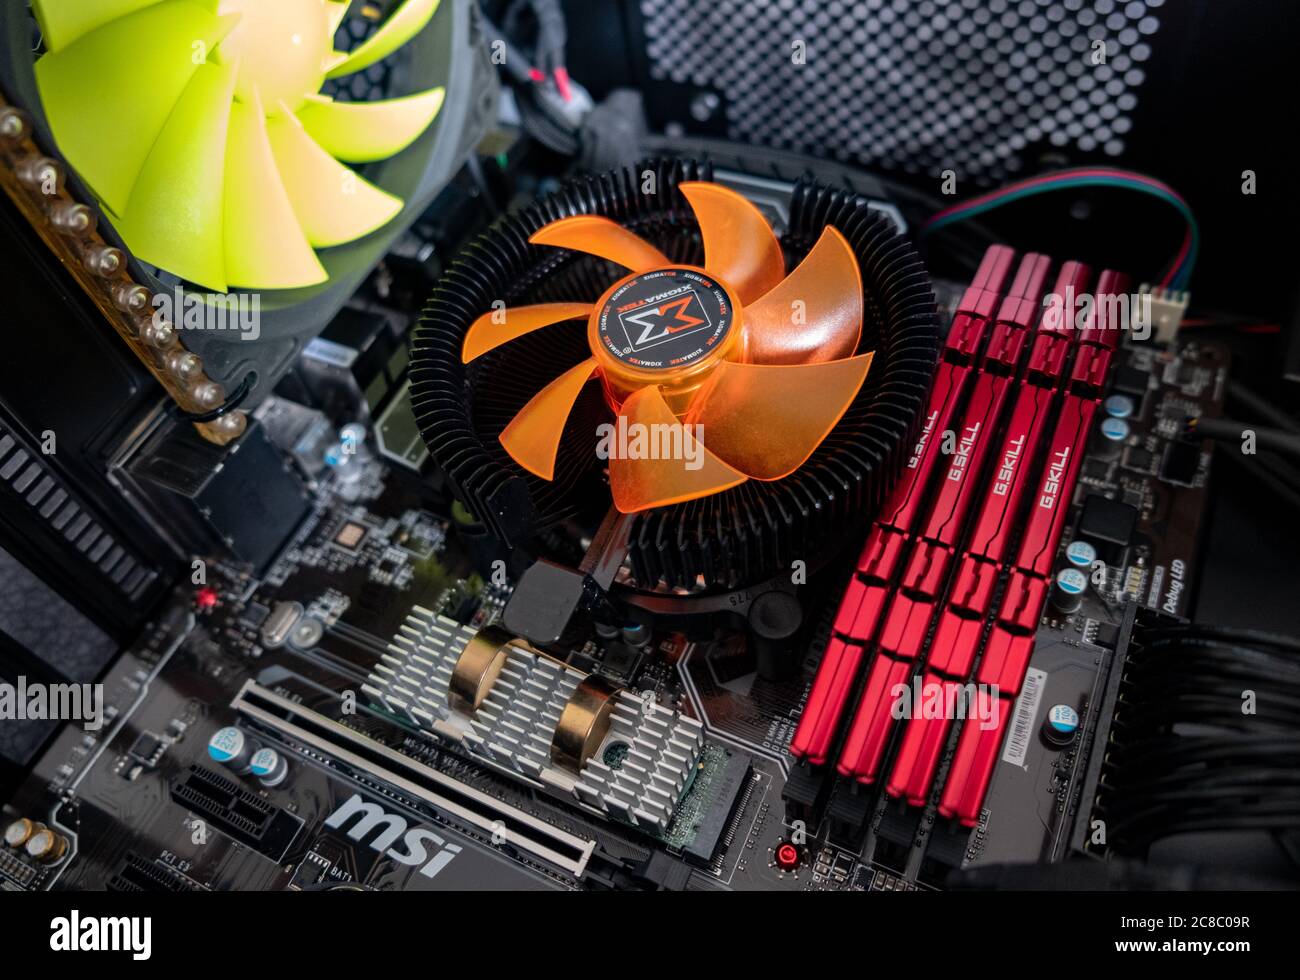 Motherboard of a personal computer with memory modules fans and CPU Cooler Stock Photo